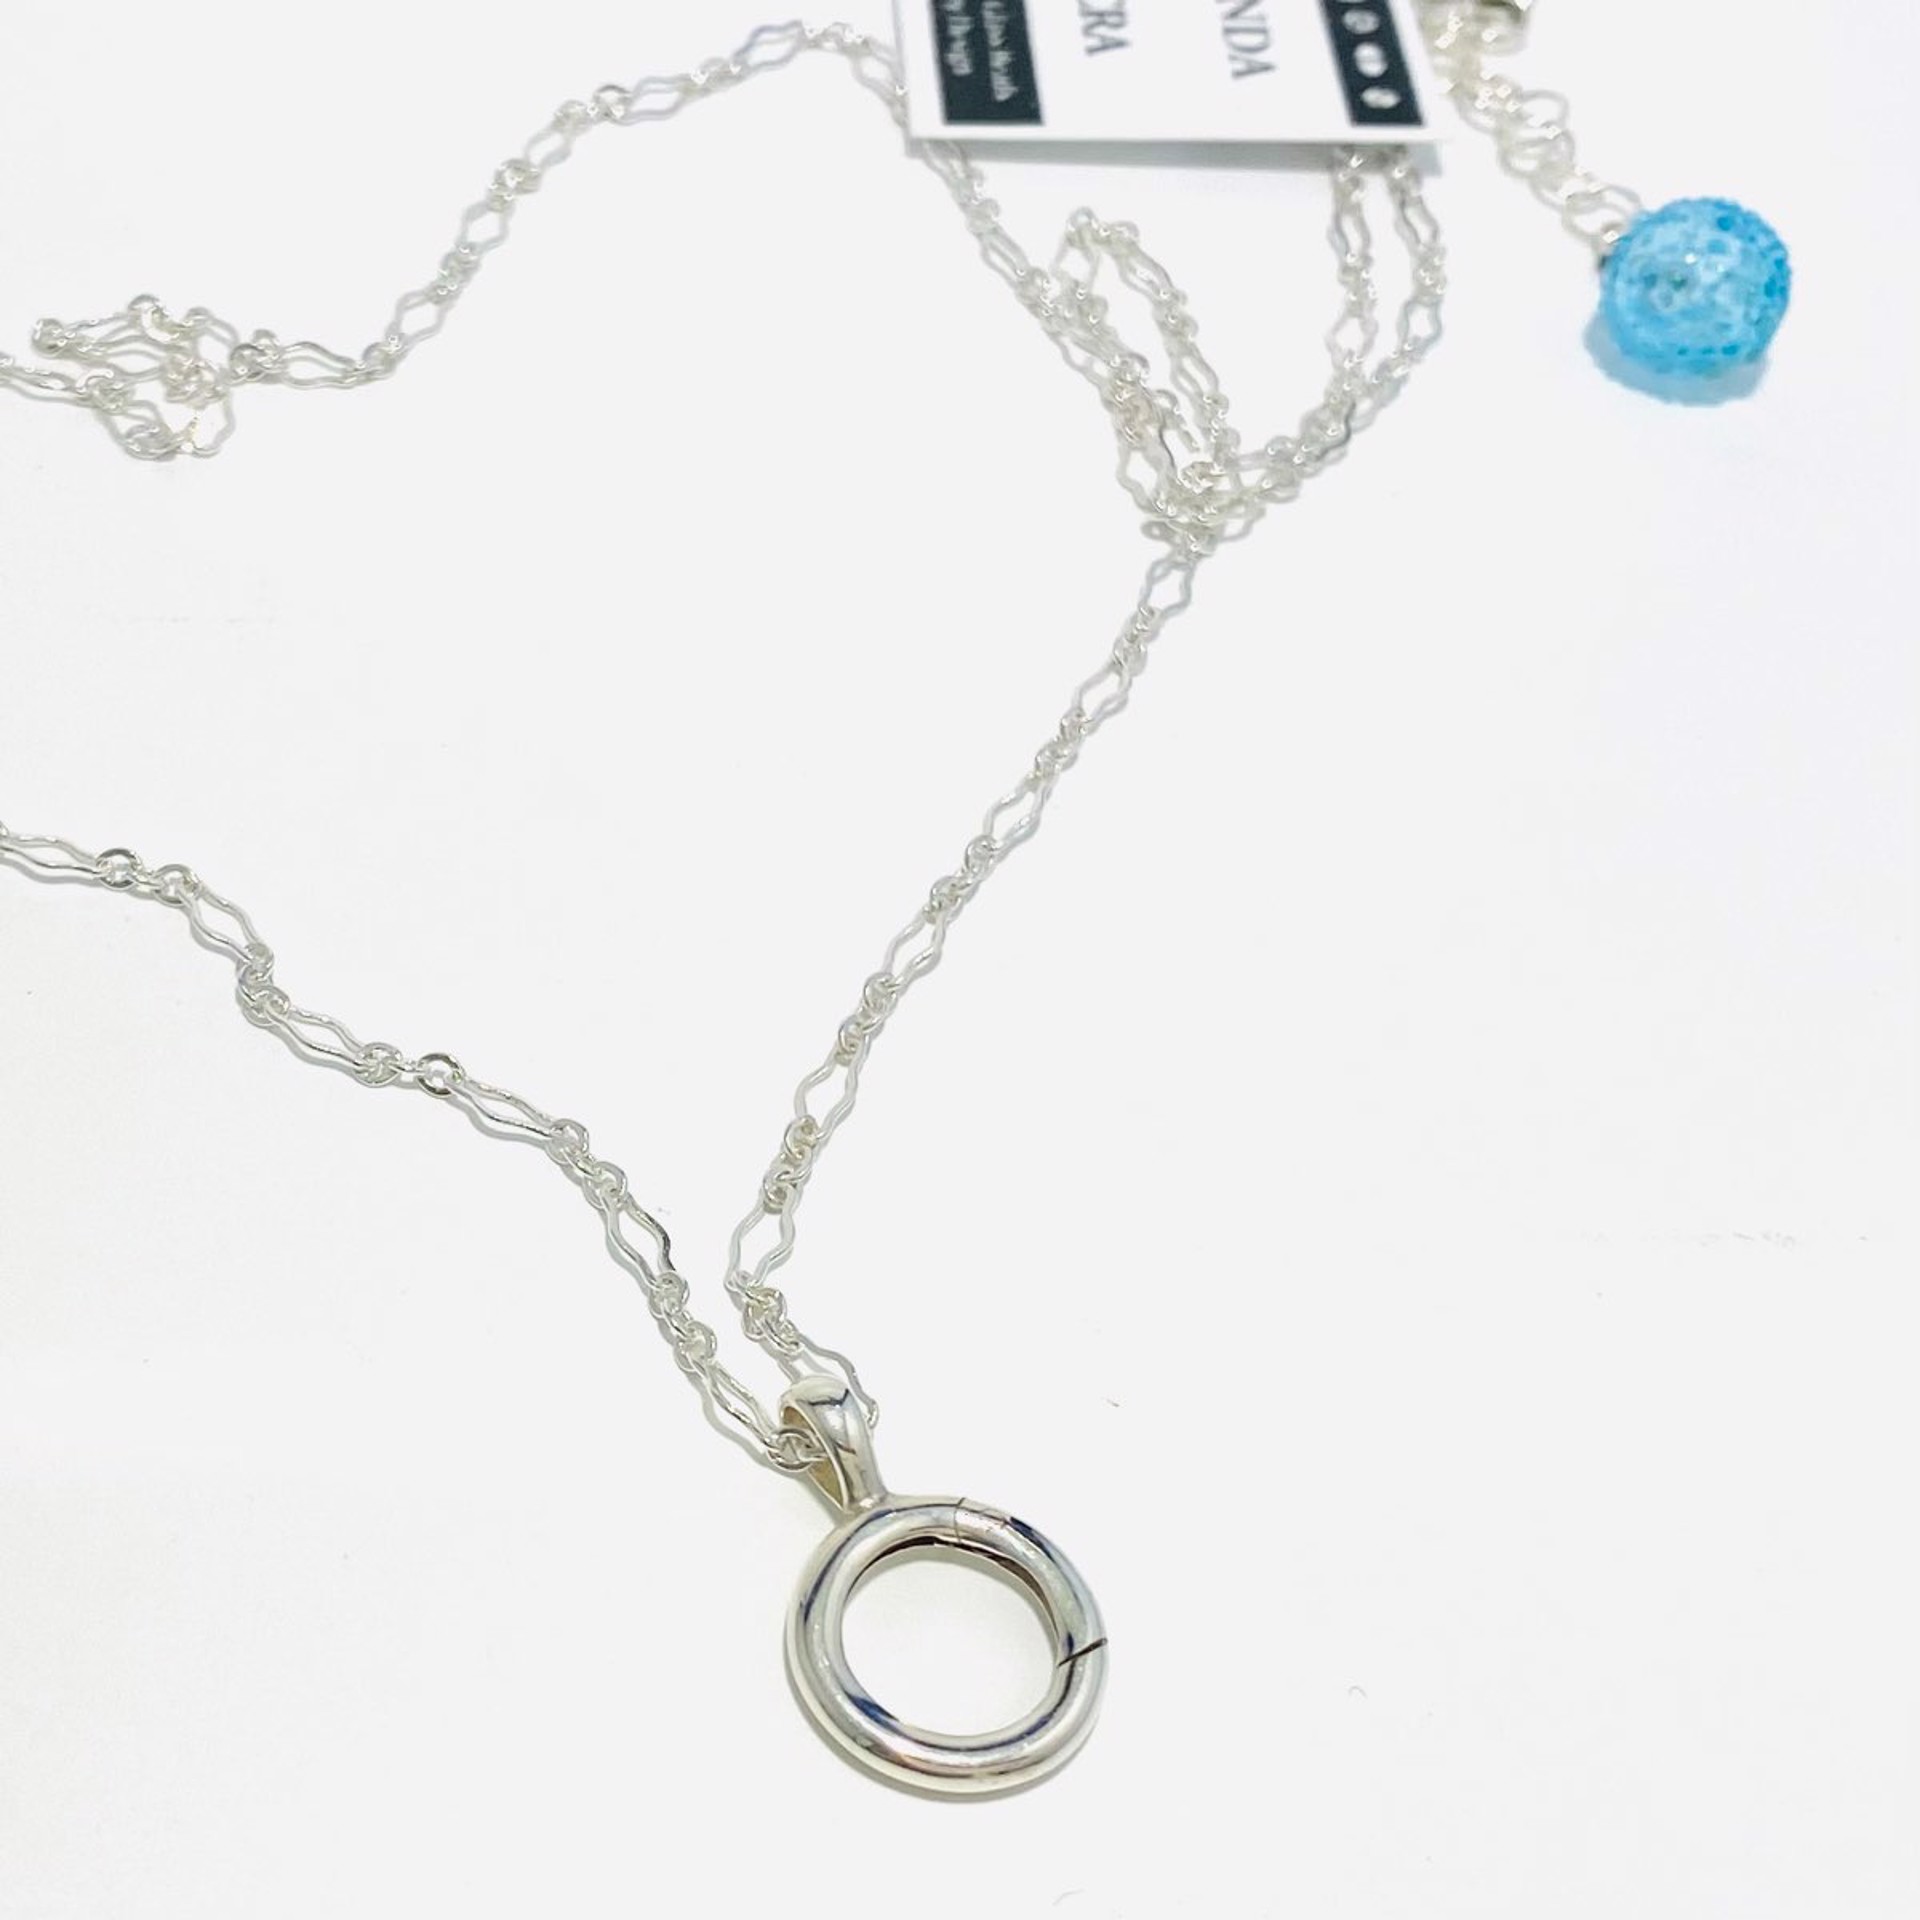 Sterling Silver 24" and 2"ext Necklace & Charm Holder by Linda Sacra